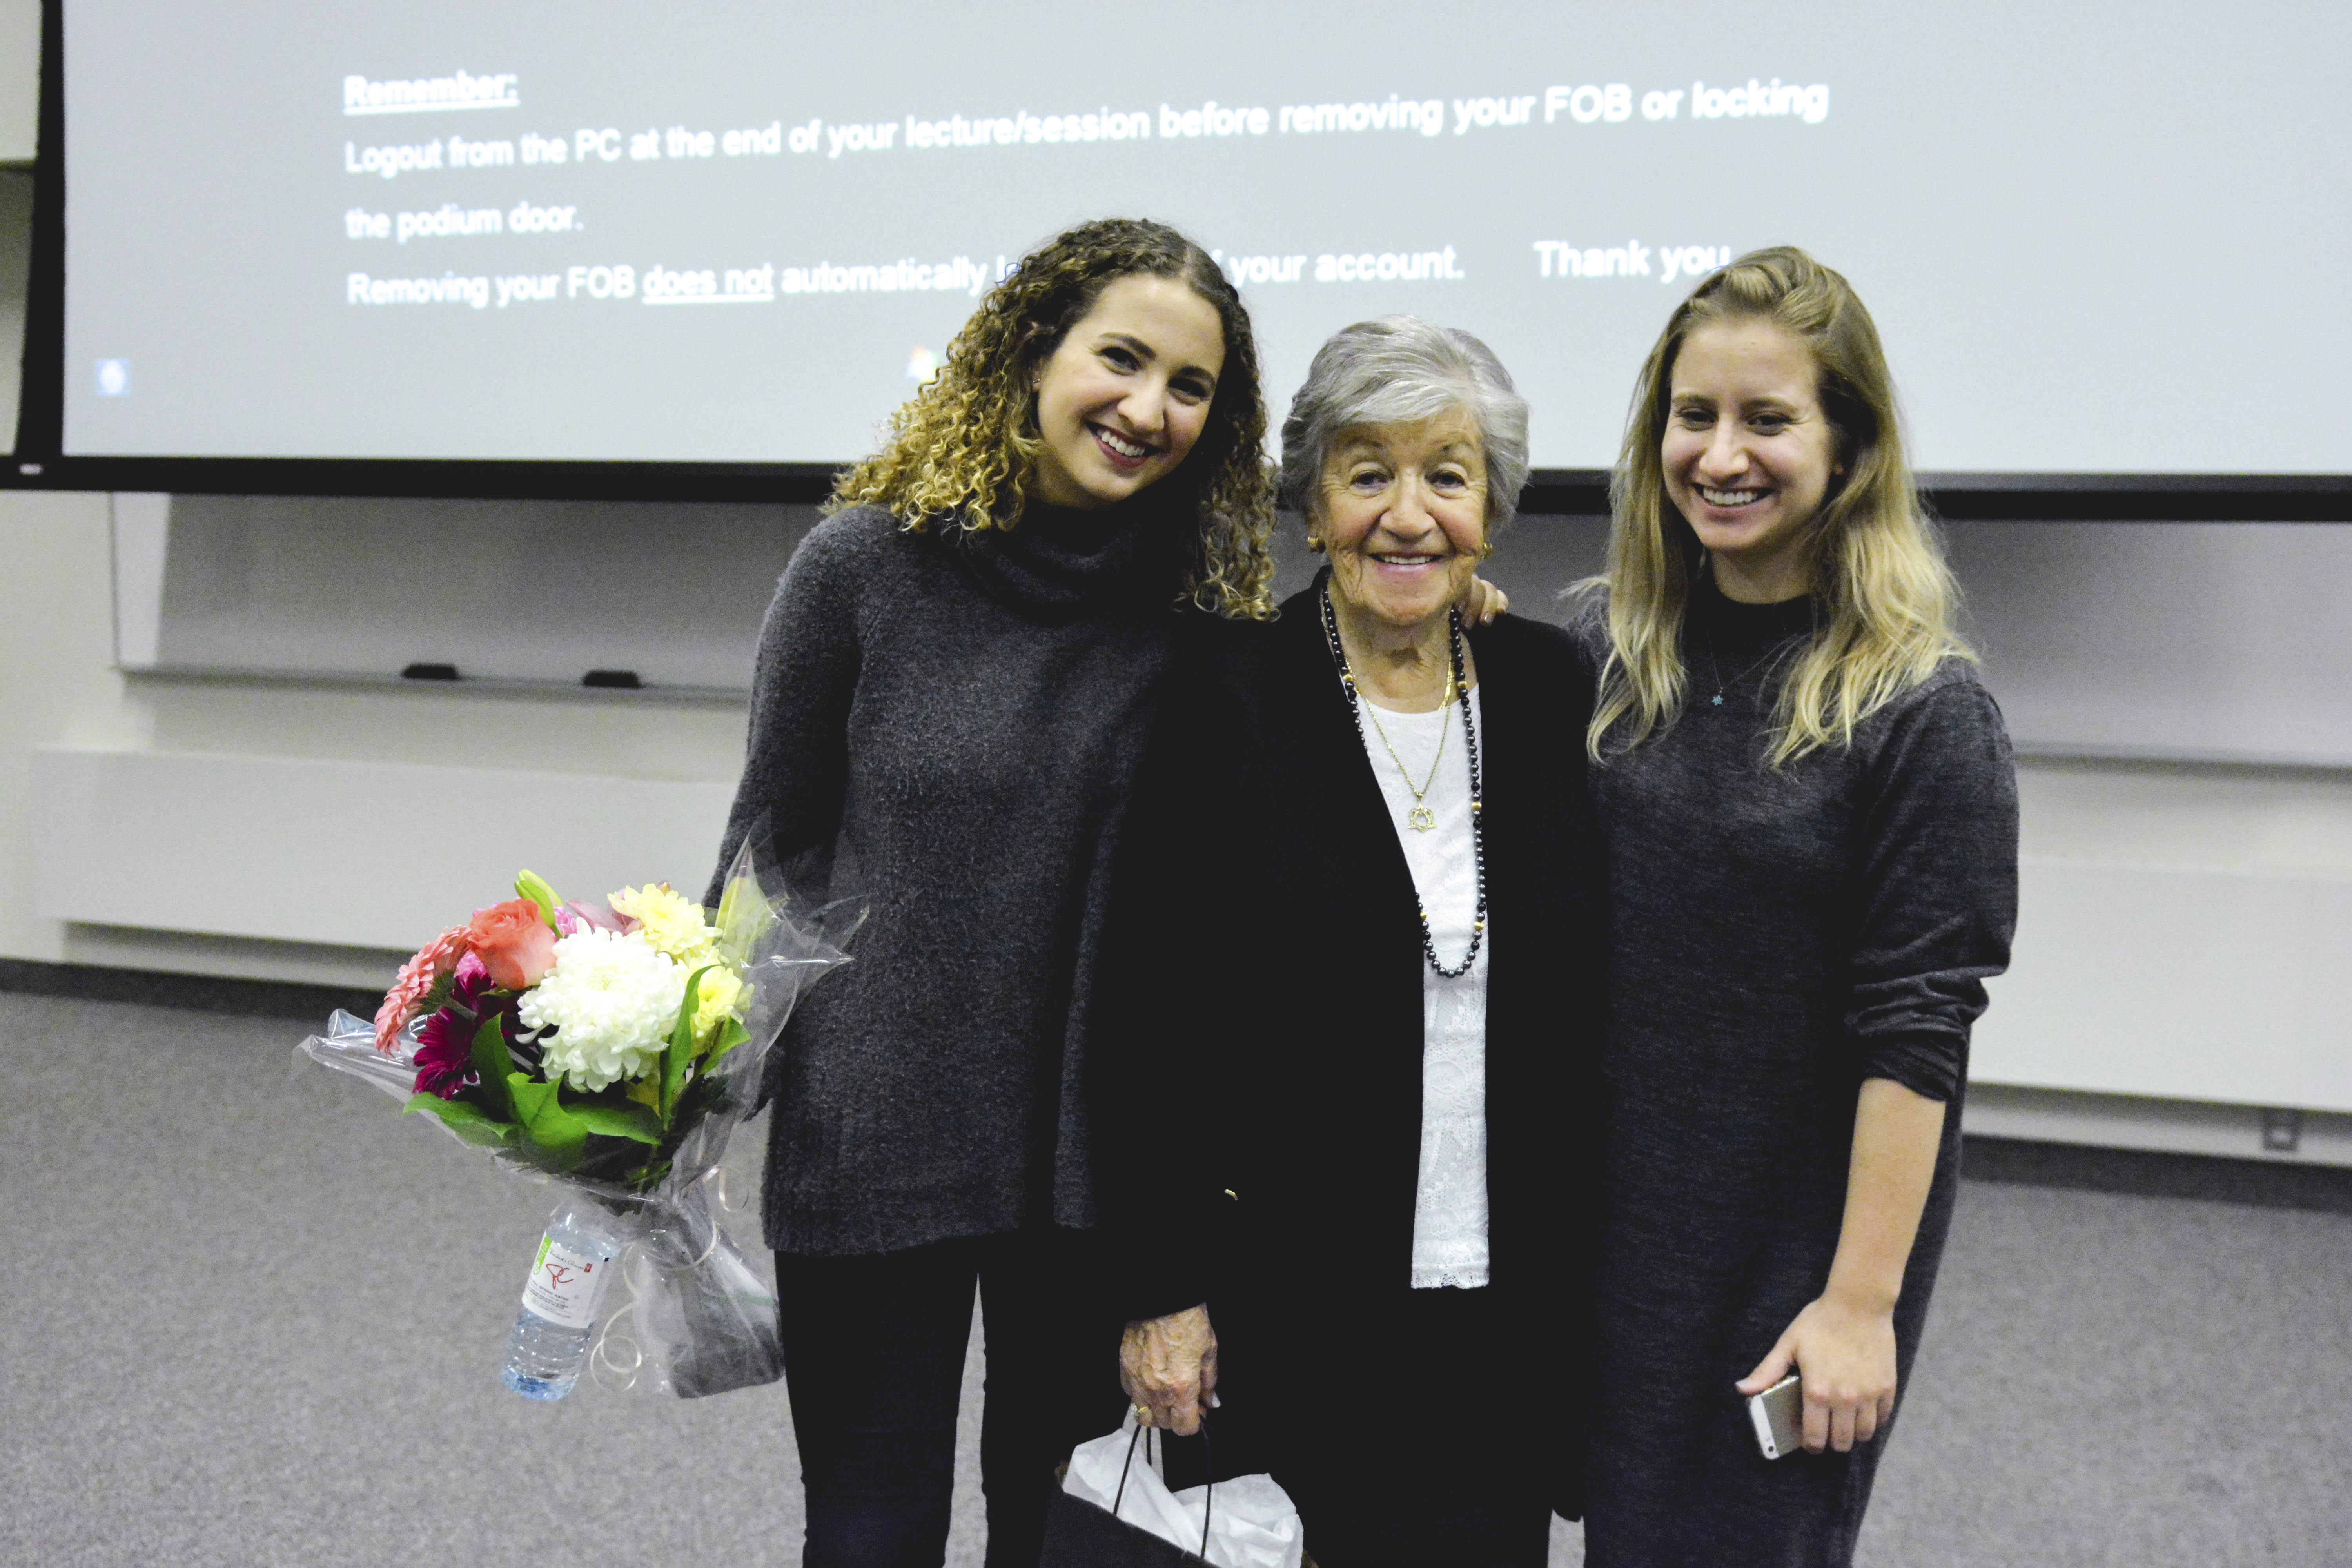 Holocaust survivor Paula Goldhar (middle) with her granddaughters Dayna Goldhar (left) and Eli Goldhar (right). Photo by Ju Hyun Kim